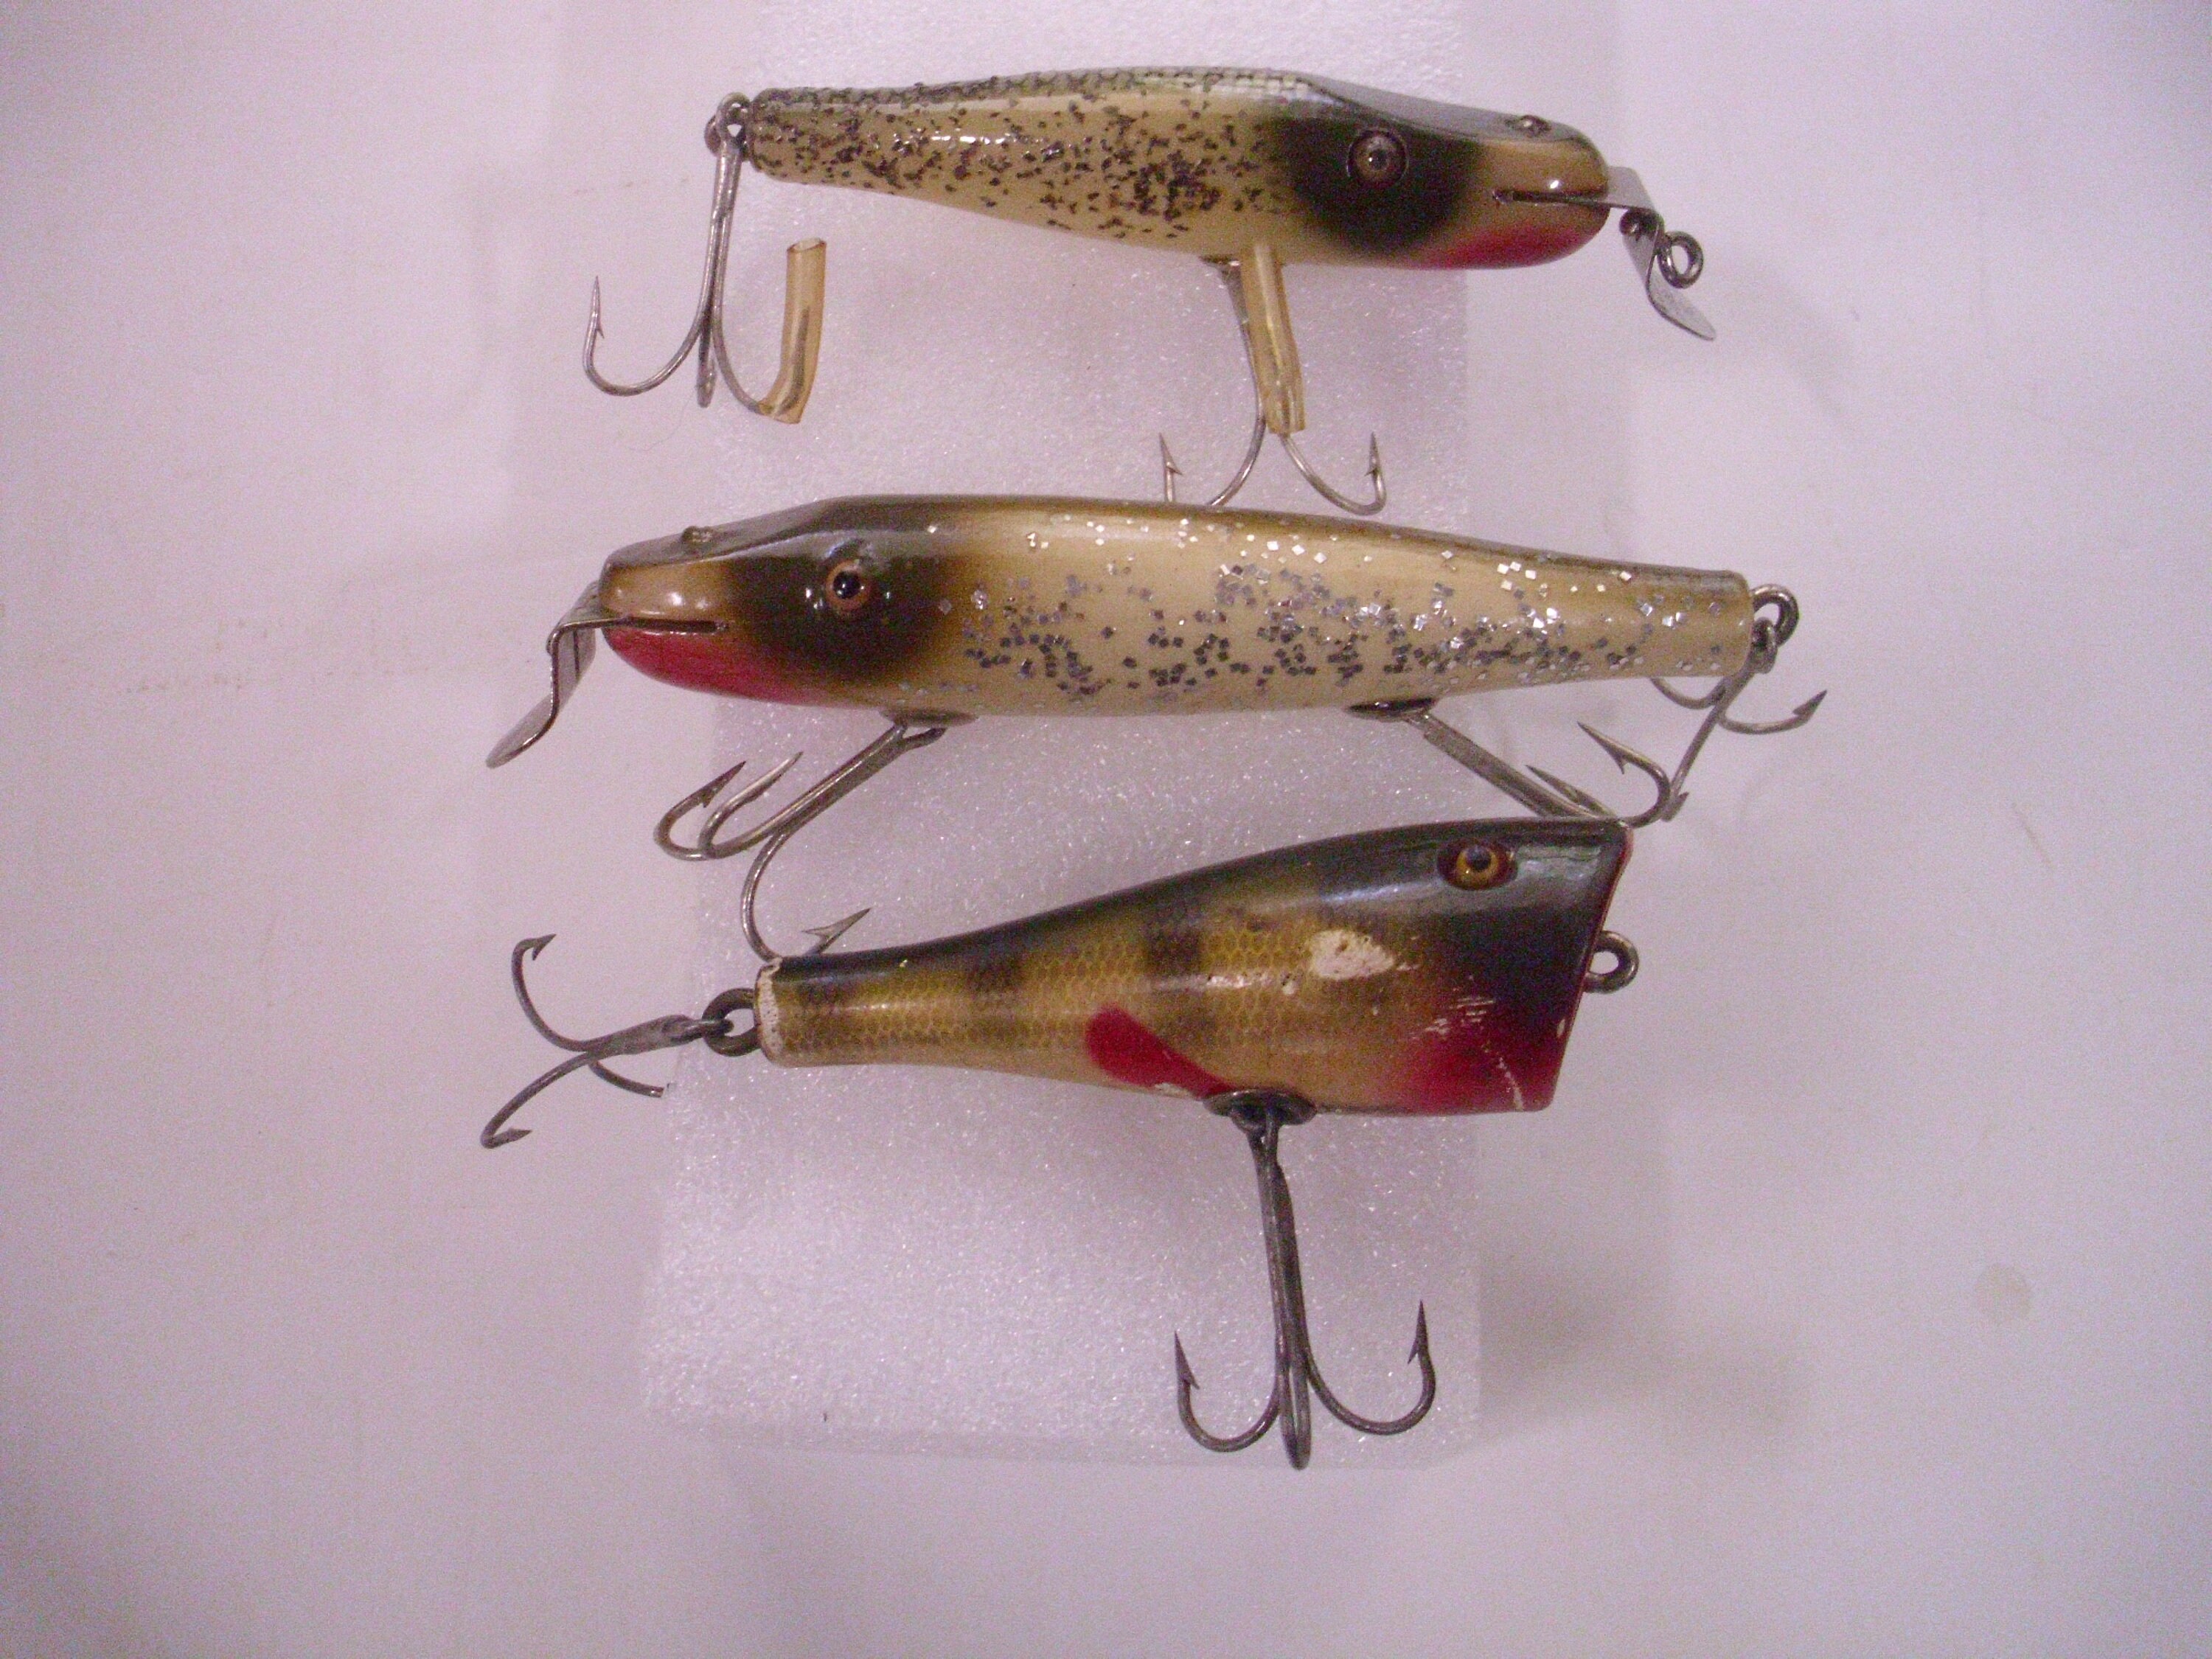 Vintage Fishing Lures Lot of 3 Lures, CCB Co. Fish Lures, Fishing Lure Lot,  Fisherman Gift, Plunker Lure, Pike Minnow Lure 